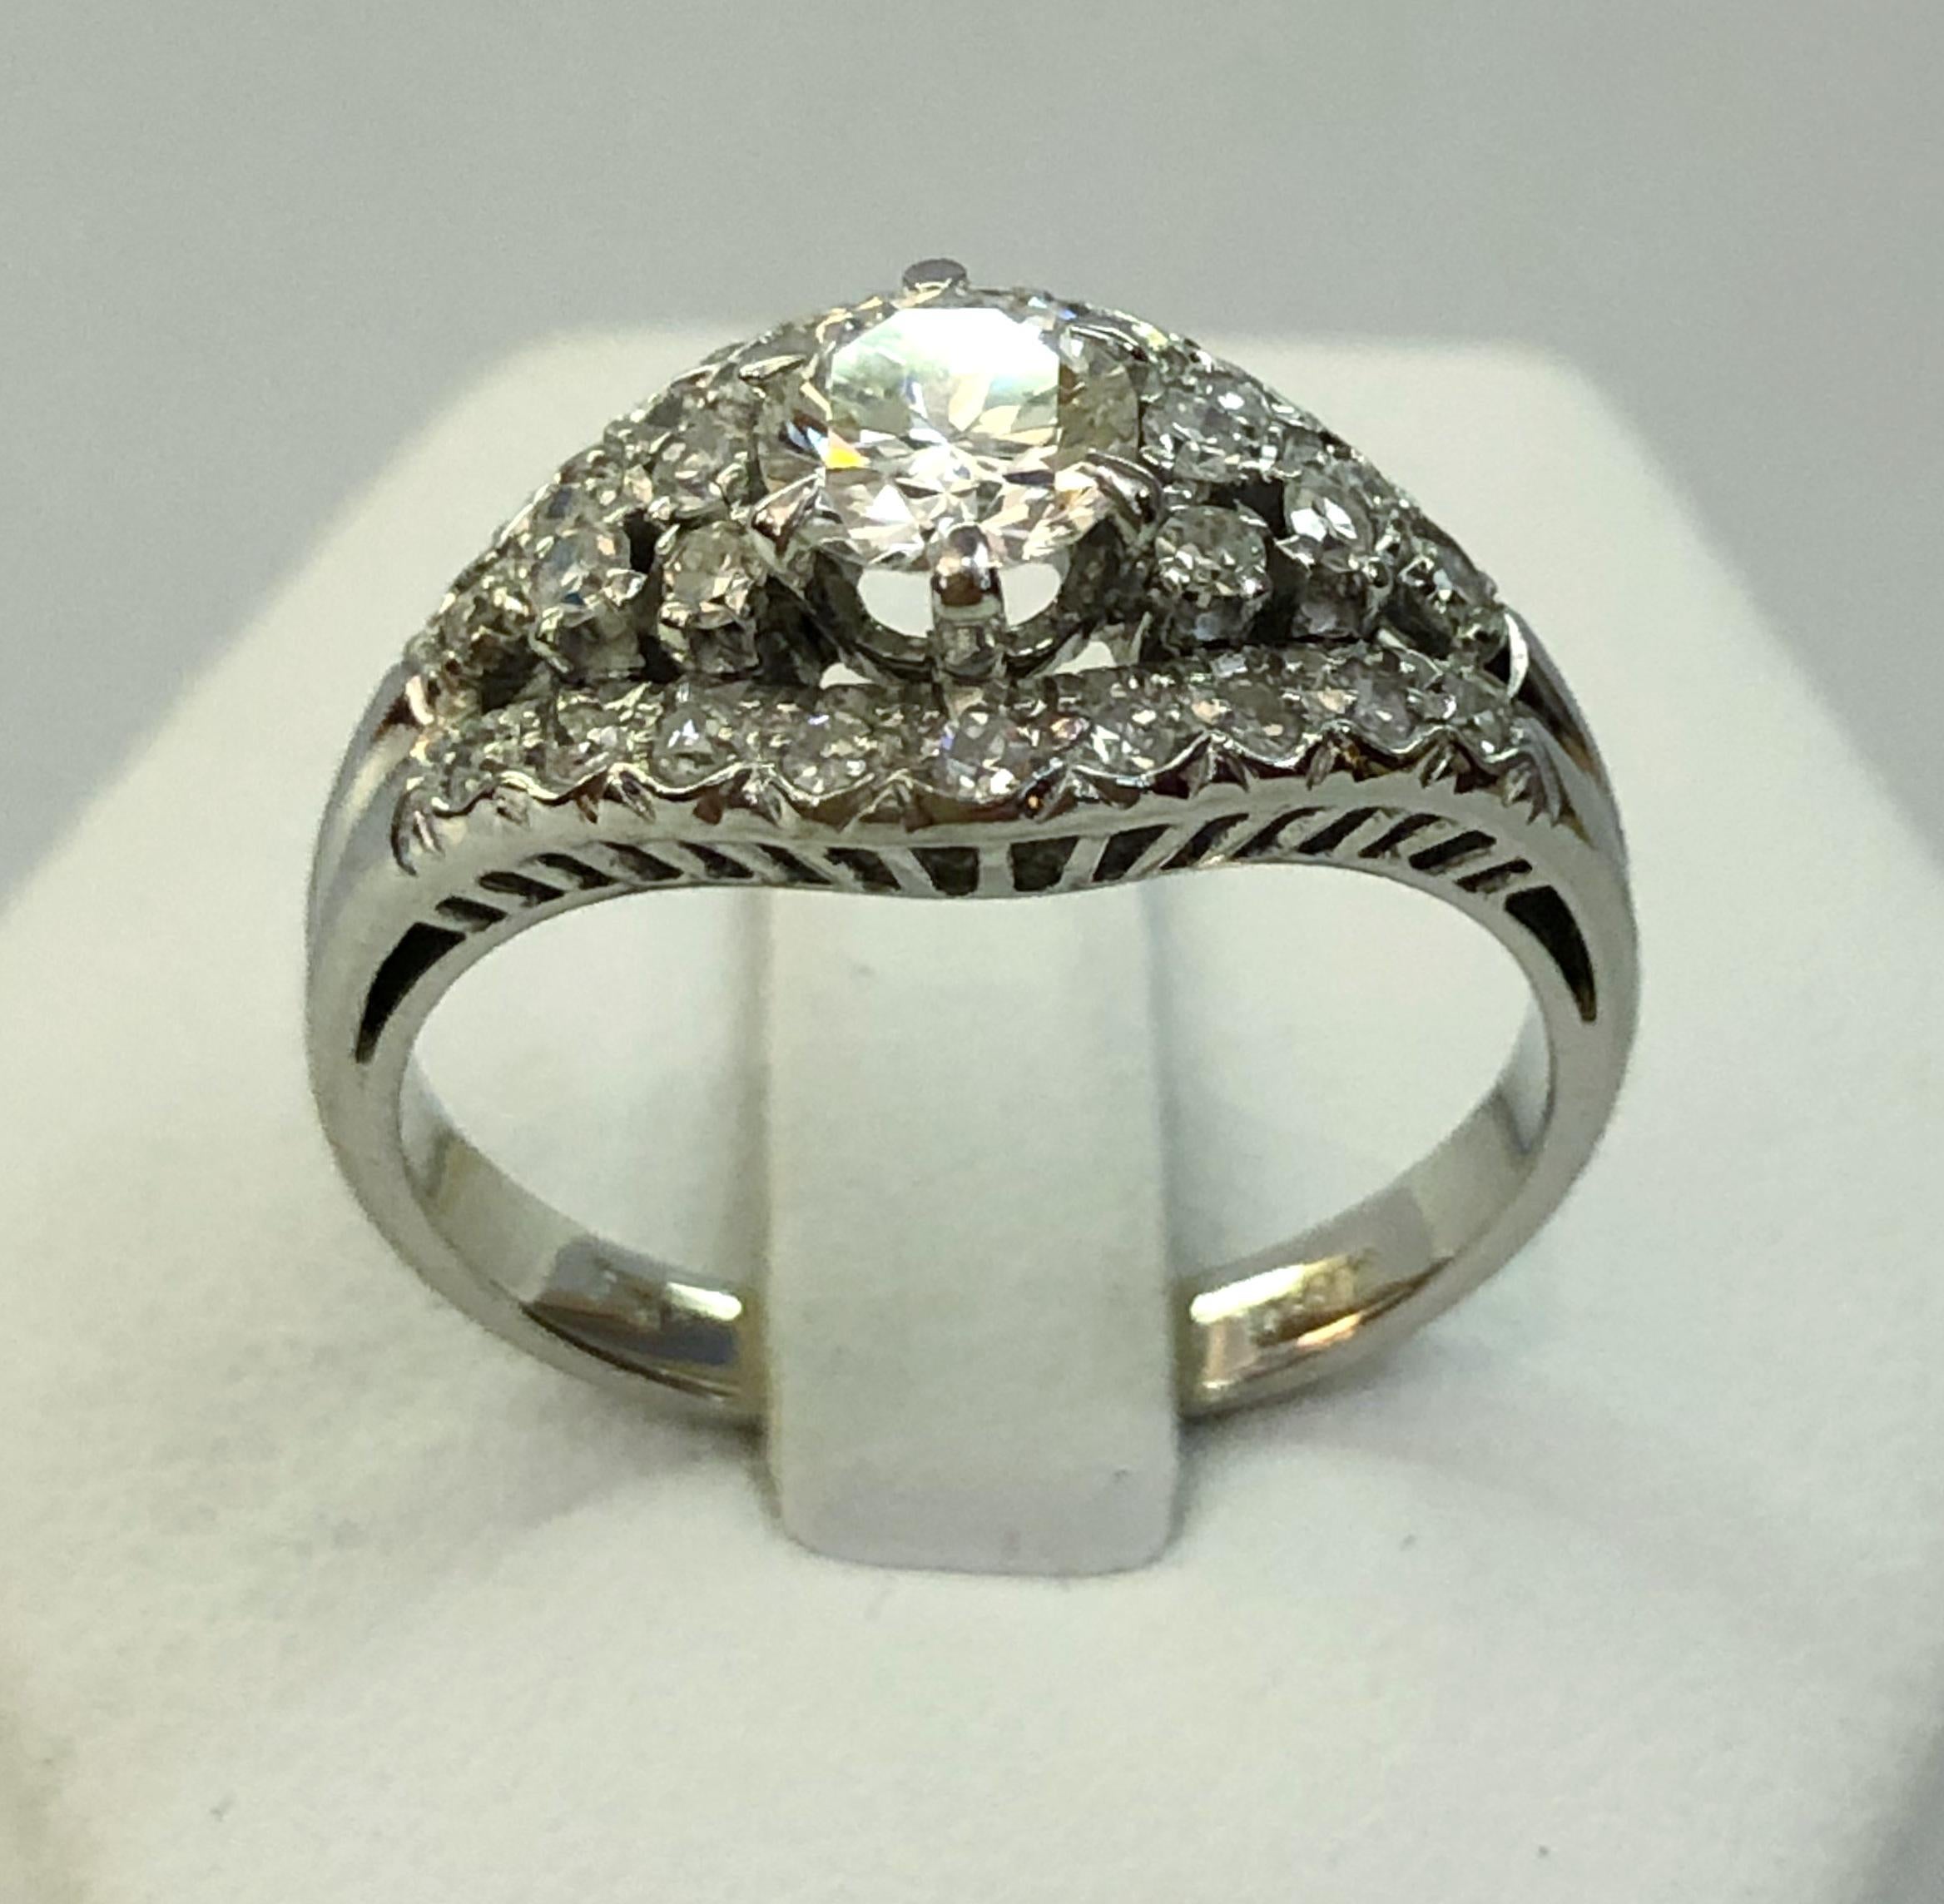 18 karat white gold ring with a central diamond of 0.5 karats and small brilliant diamonds on the stem / Italy 1950-1960s
Ring size US 7